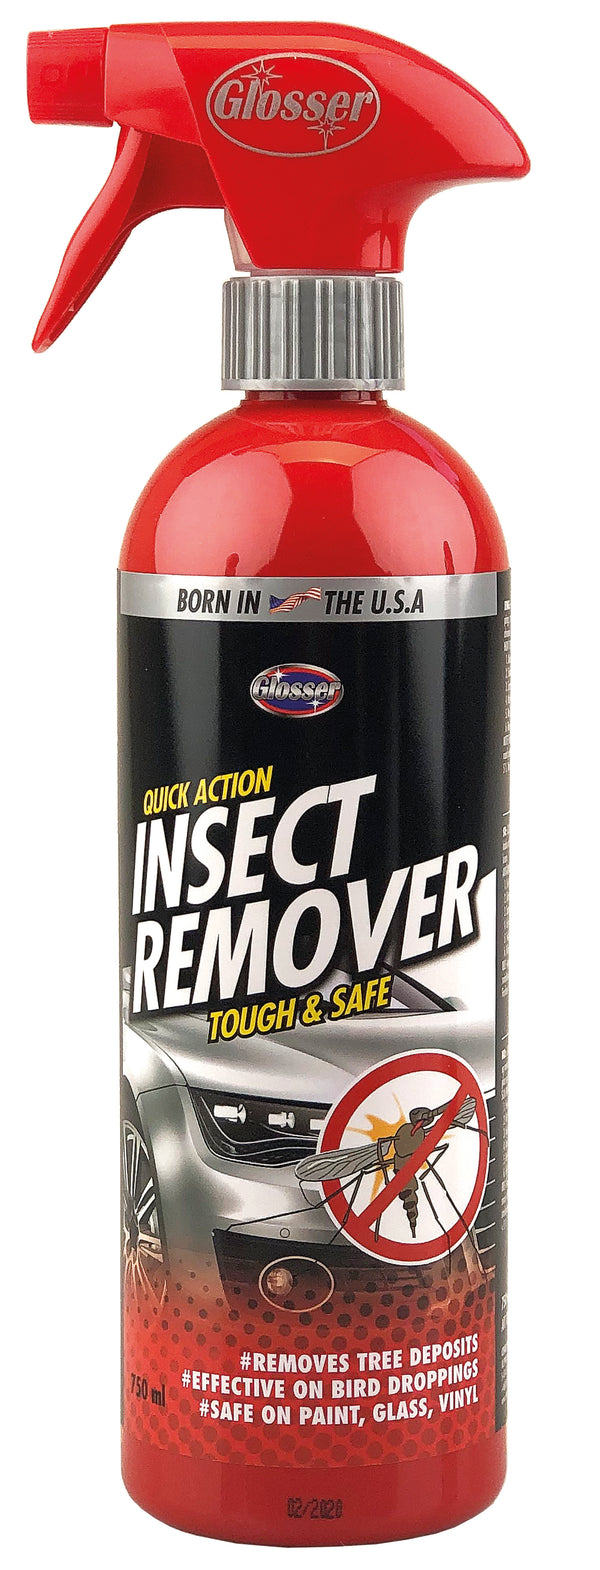 Glosser Insect Remover, 750ml.